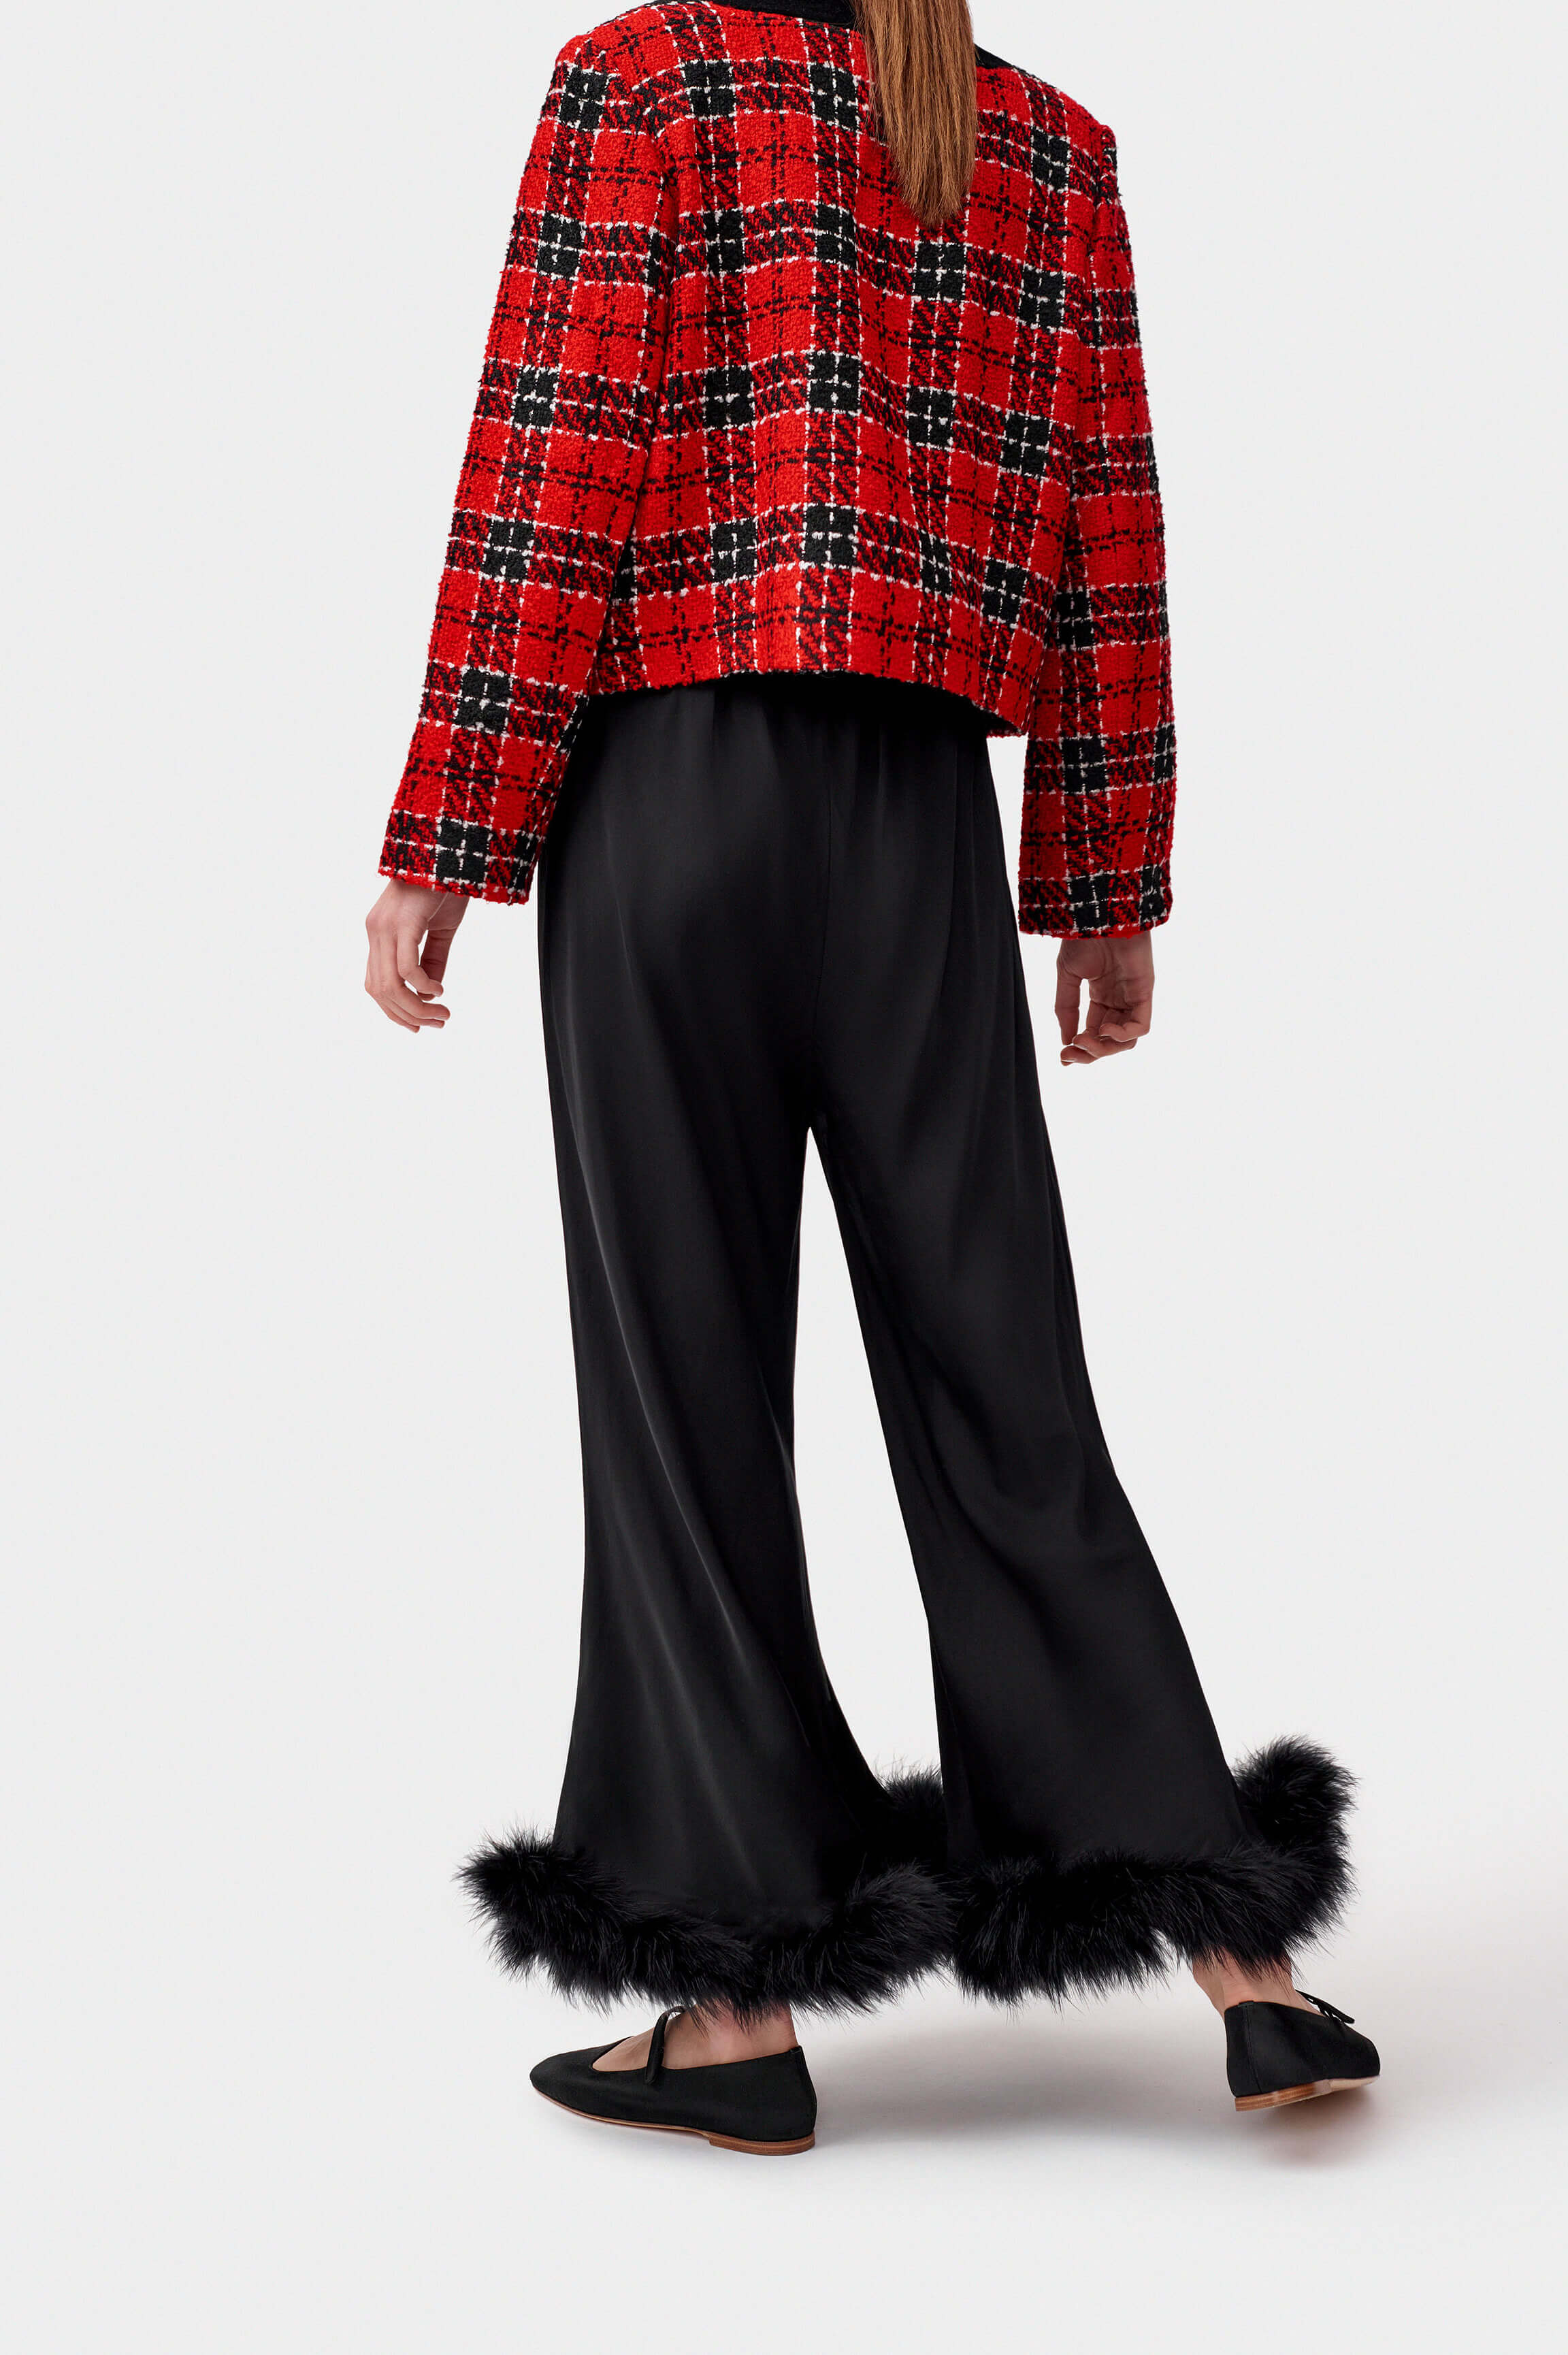 Feathered pants | Black trousers with feathers by Sleeper